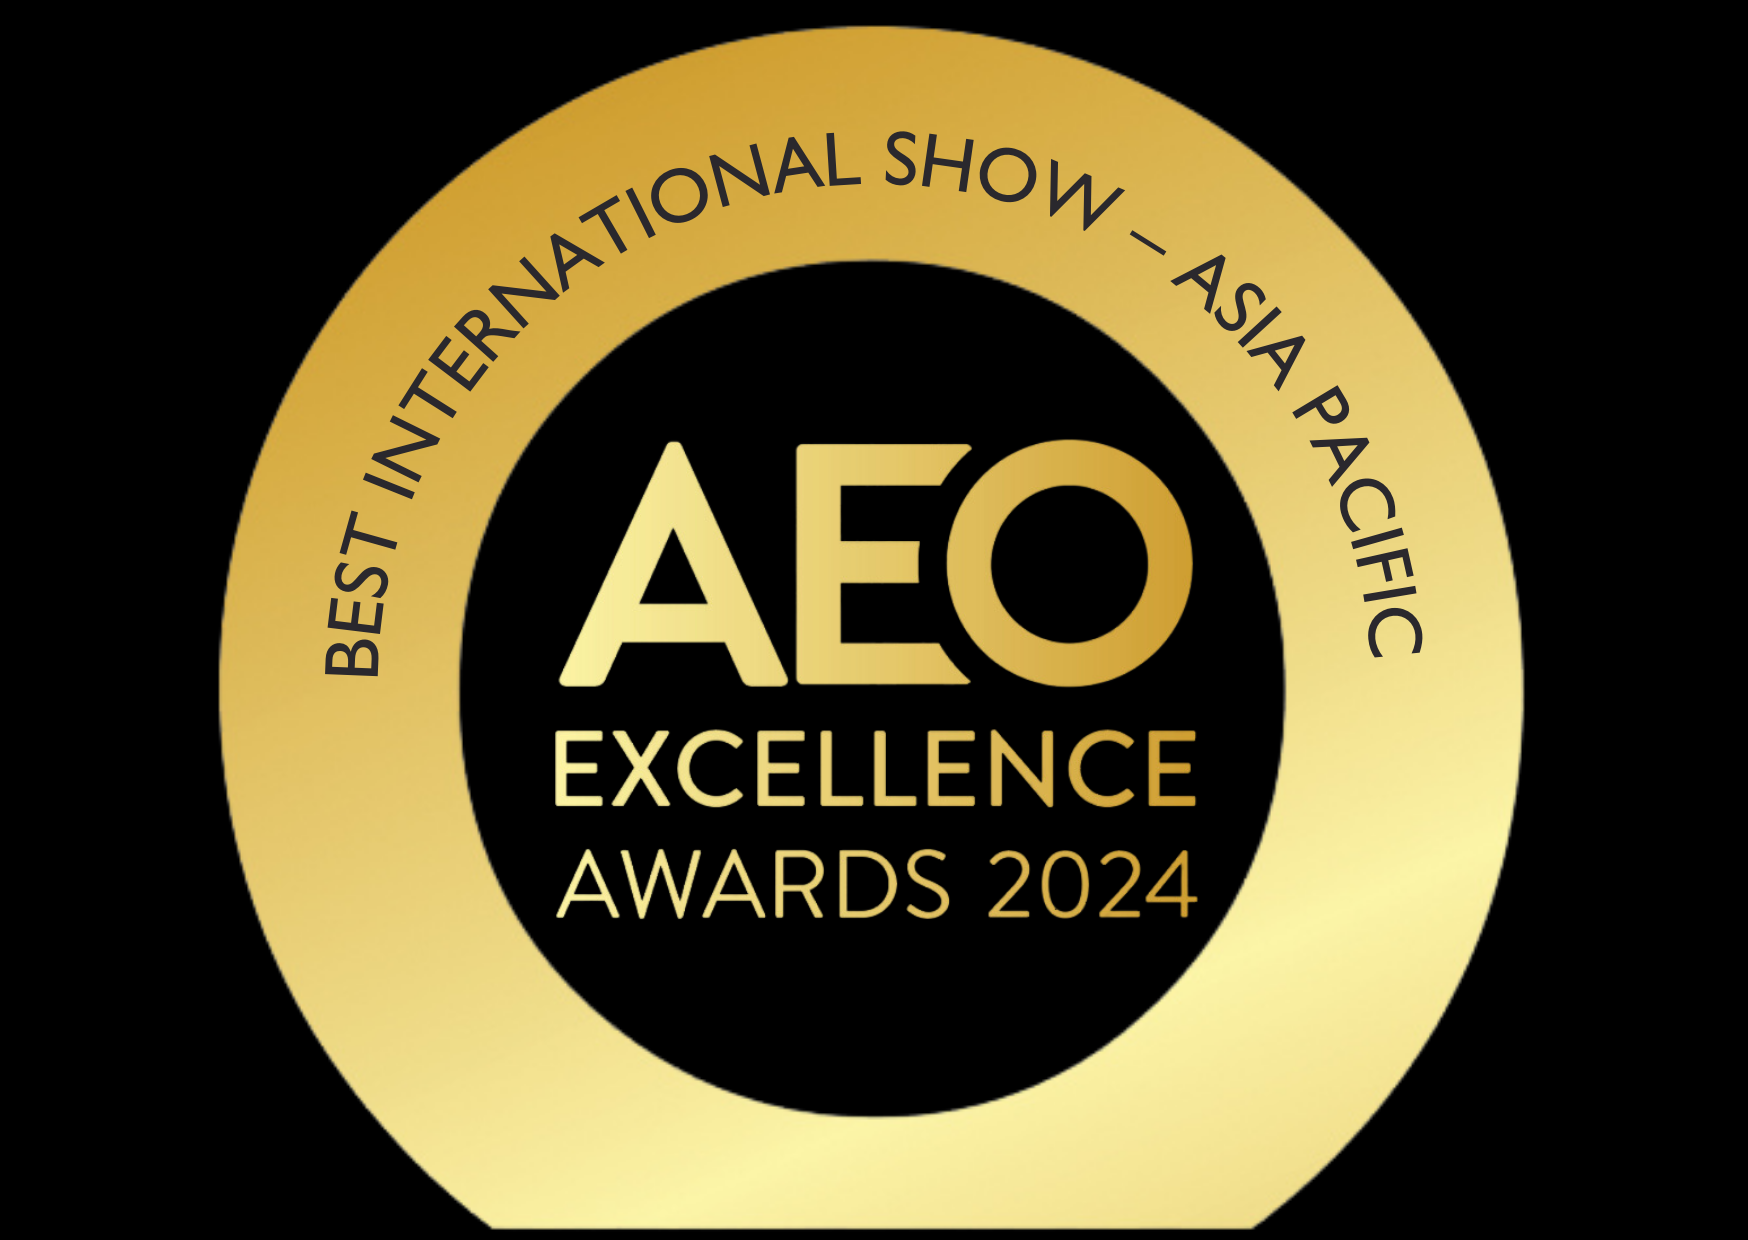 BEST INTERNATIONAL SHOW - ASIA PACIFIC